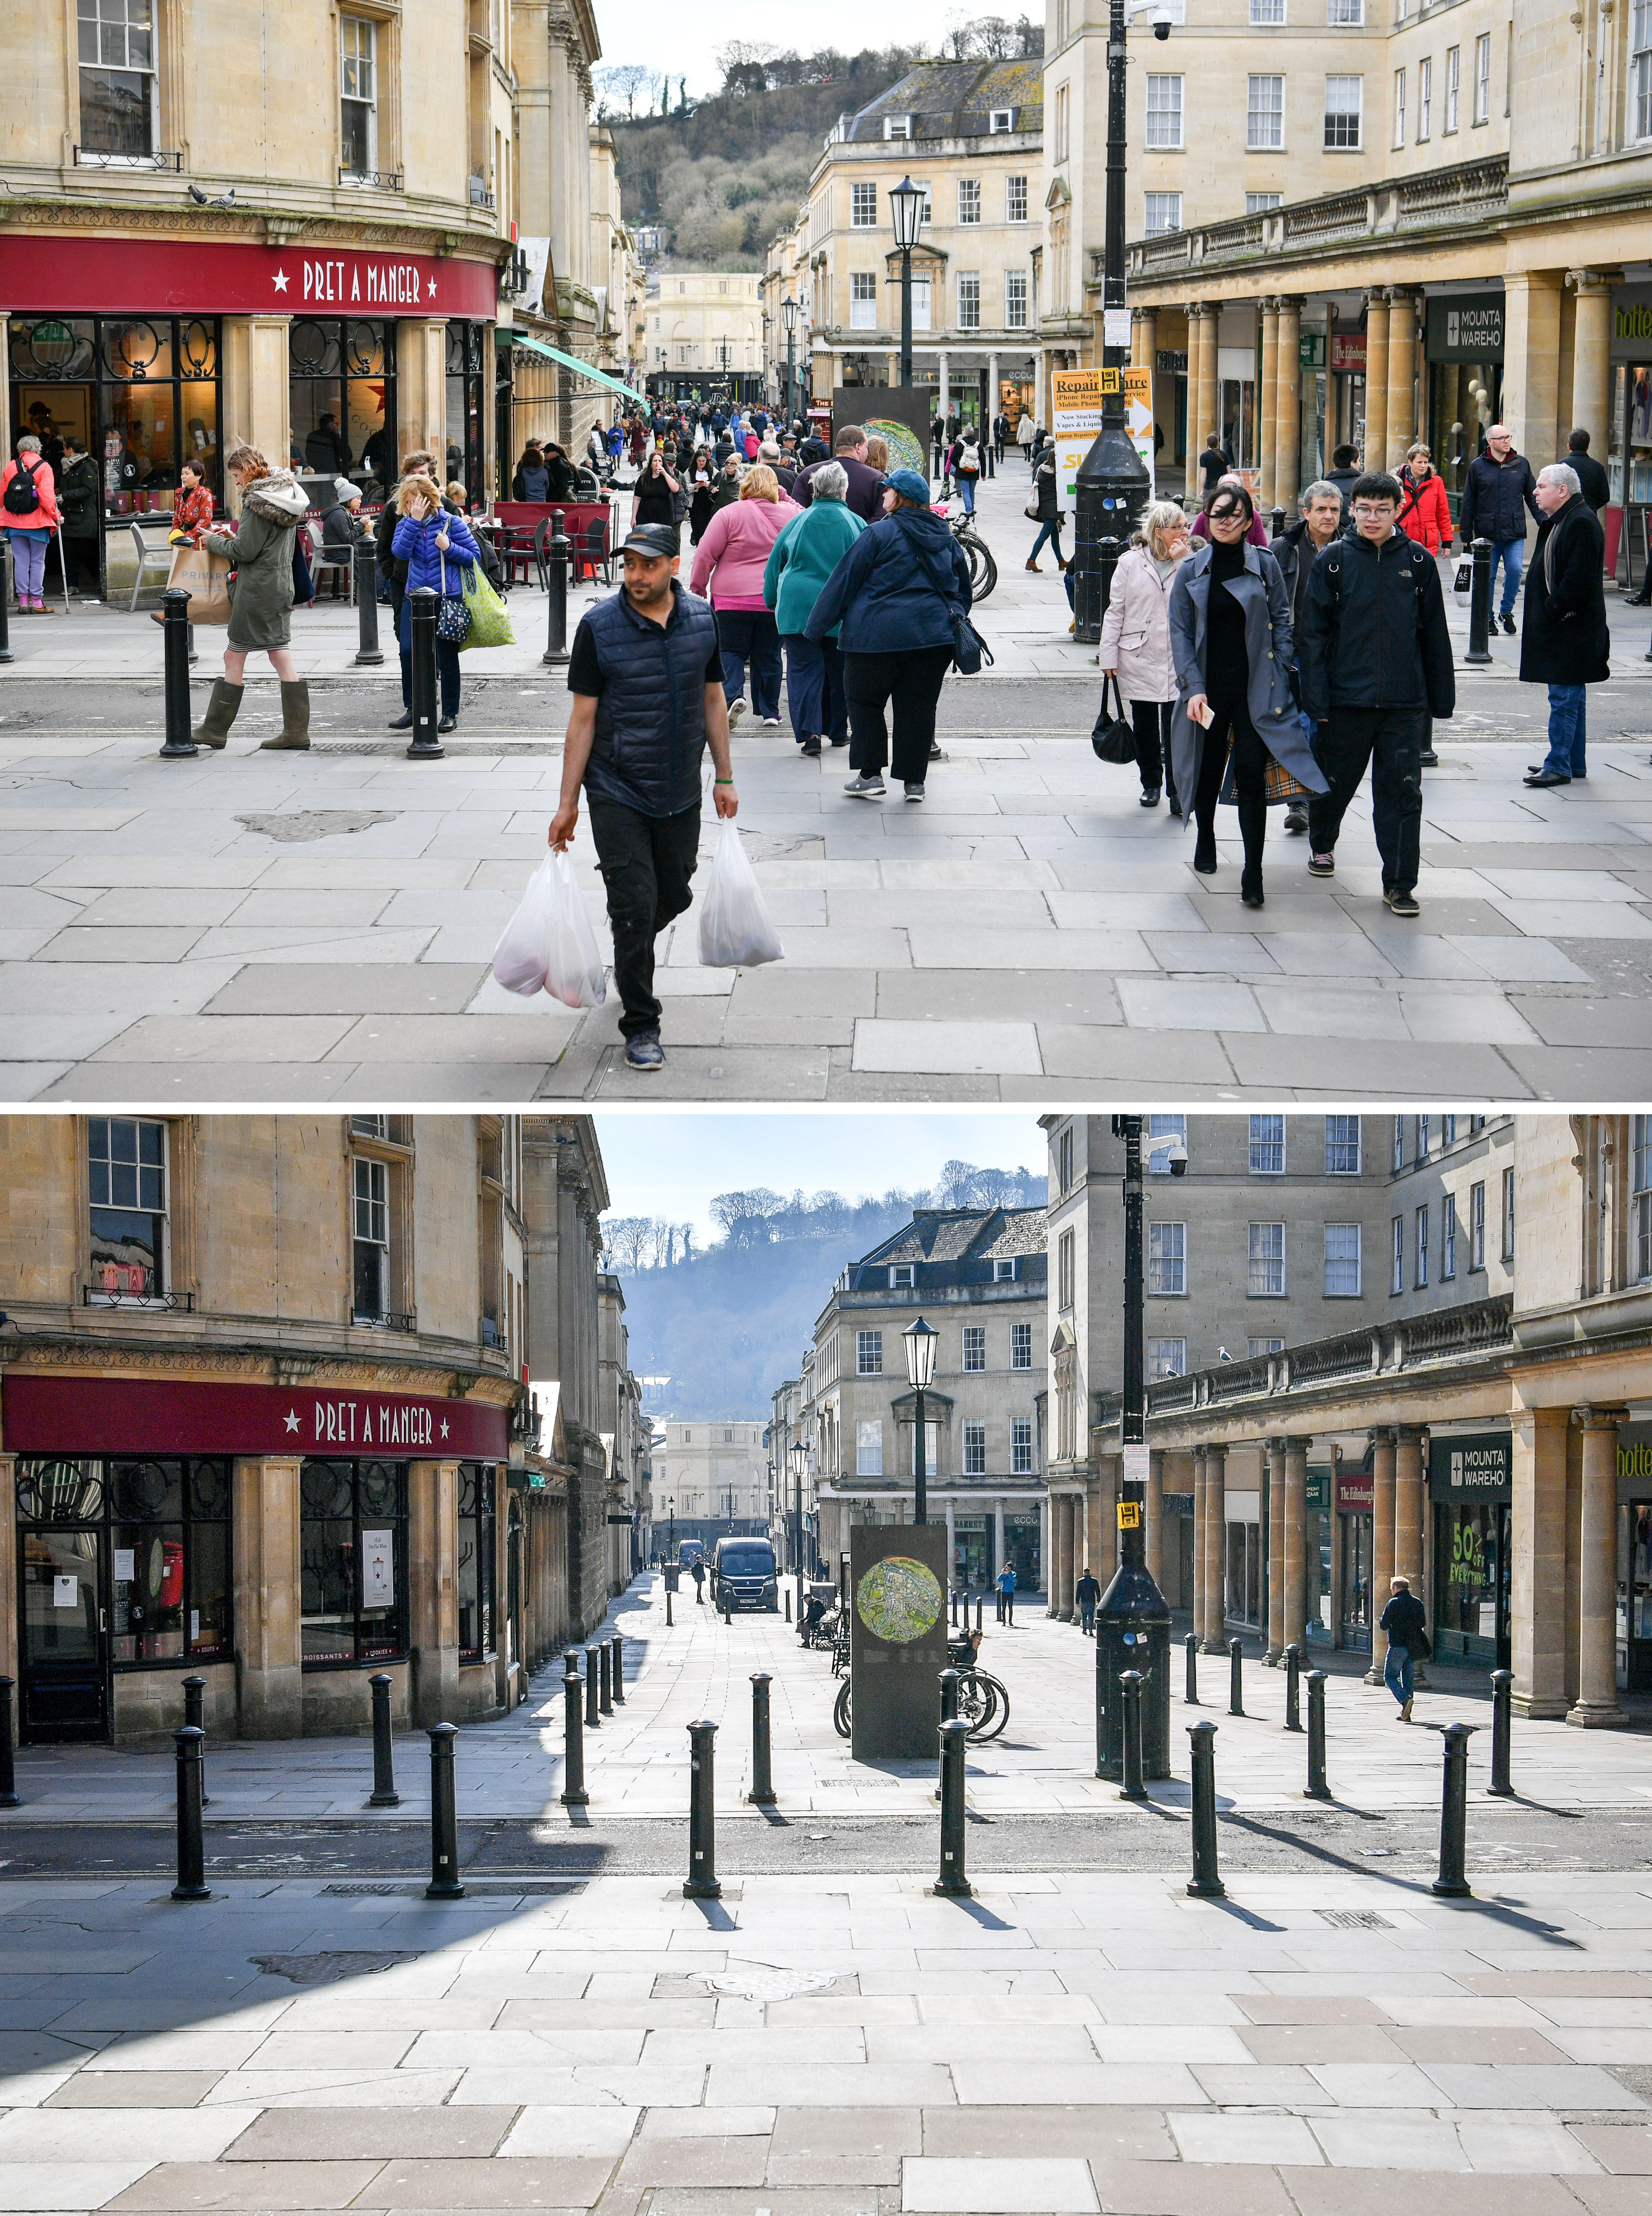 The picturesque streets of Bath empty of people